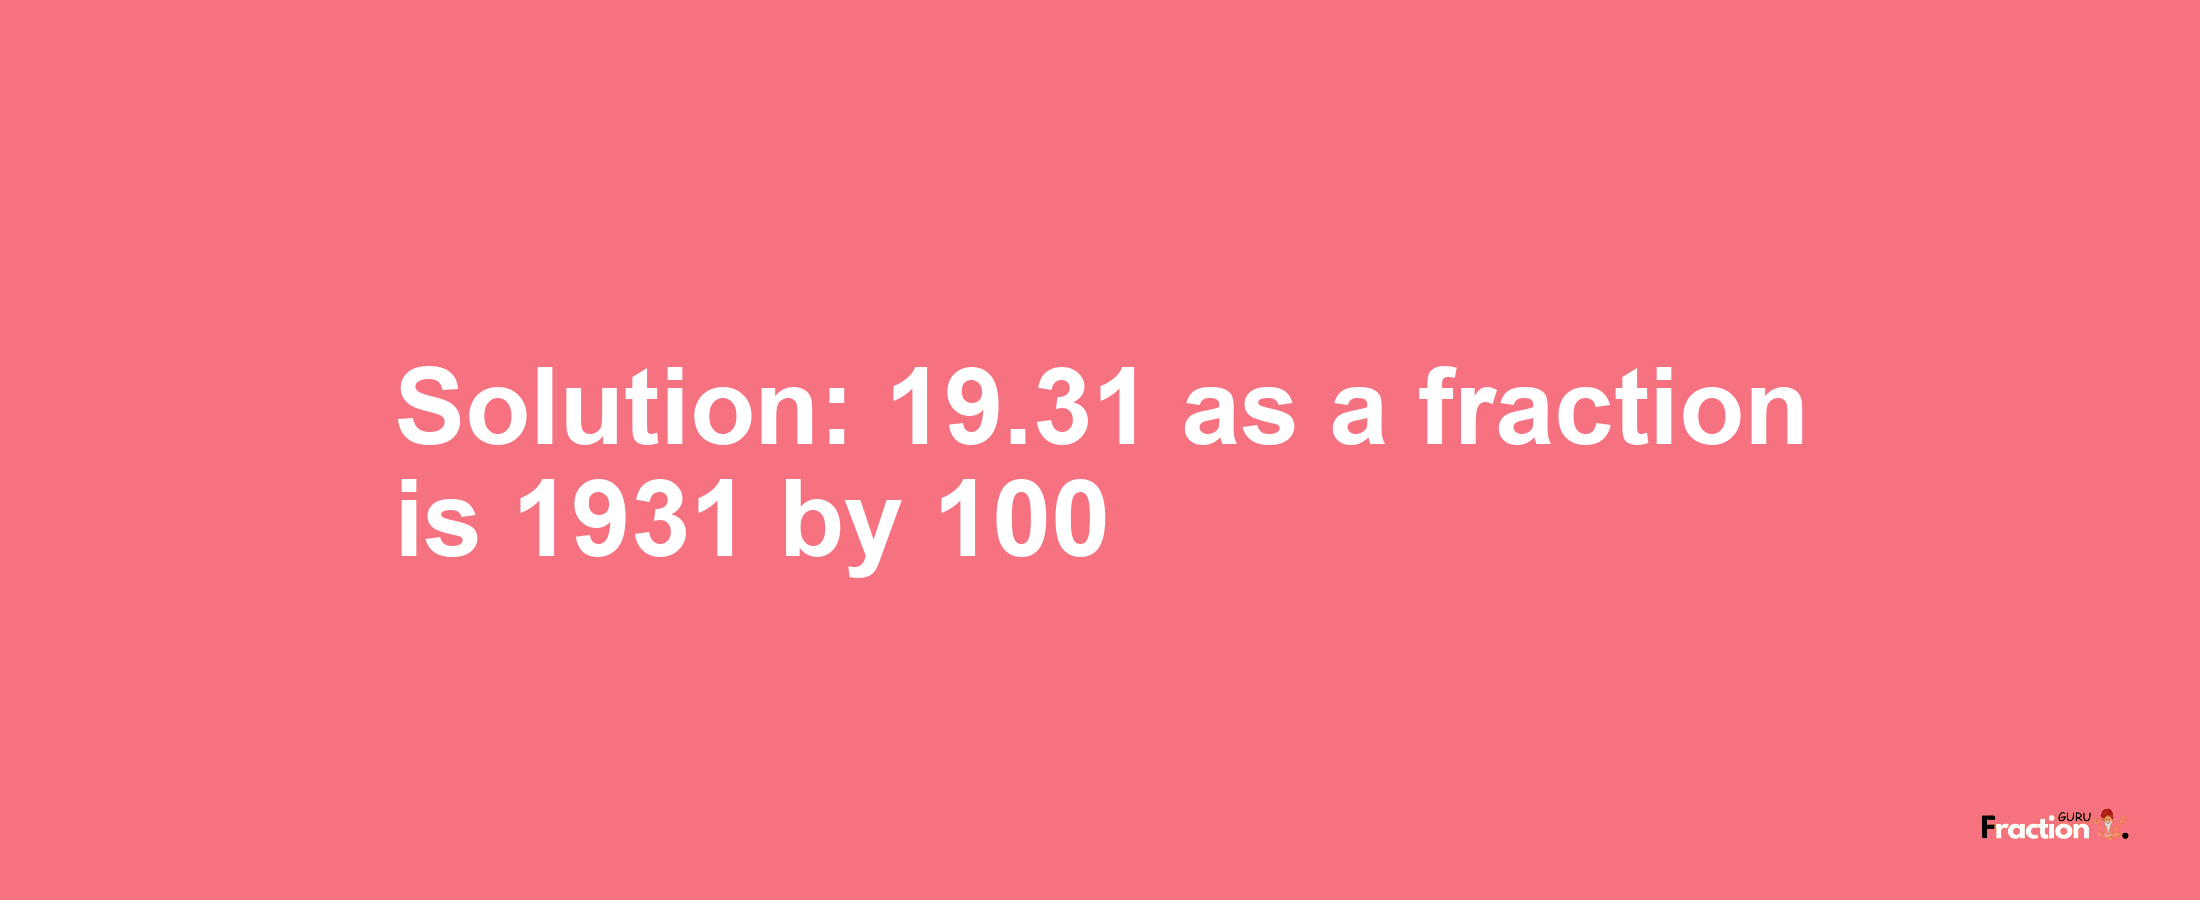 Solution:19.31 as a fraction is 1931/100